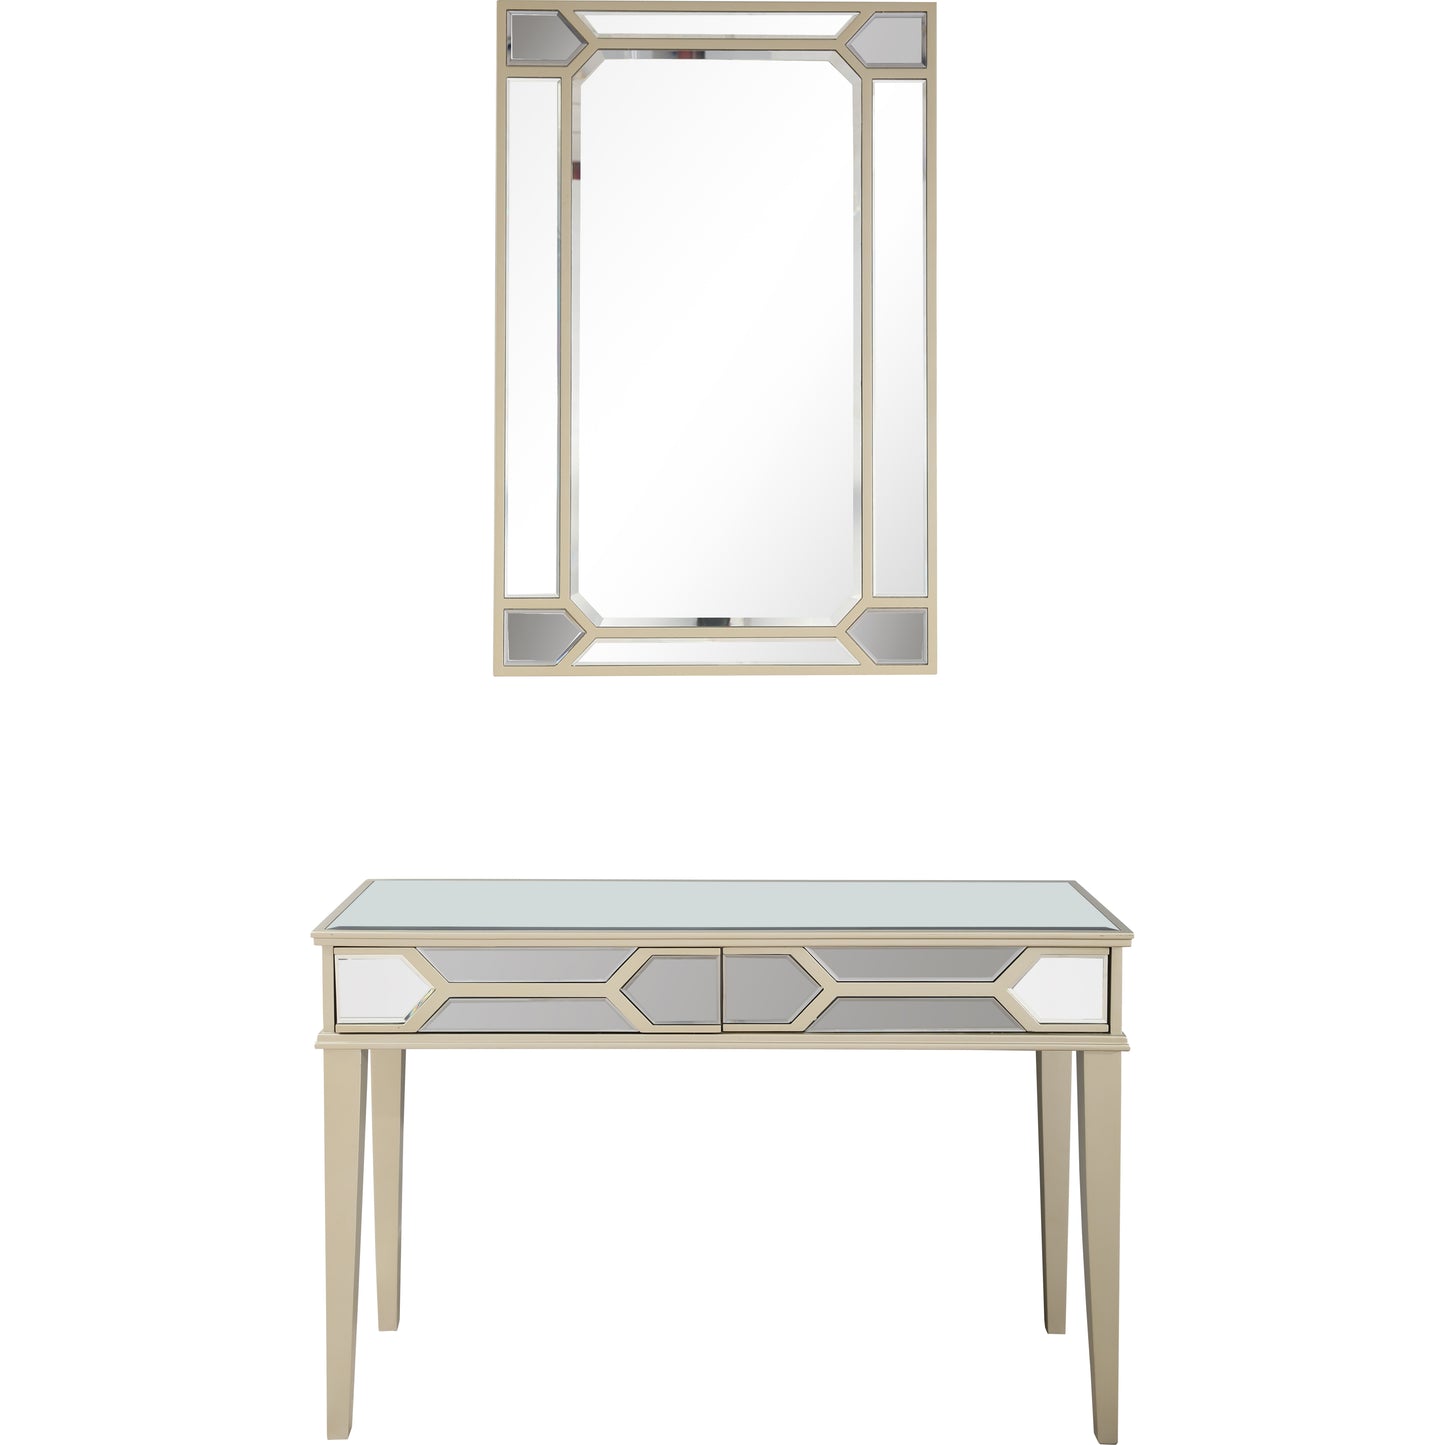 Keeley Wall Mirror and Console